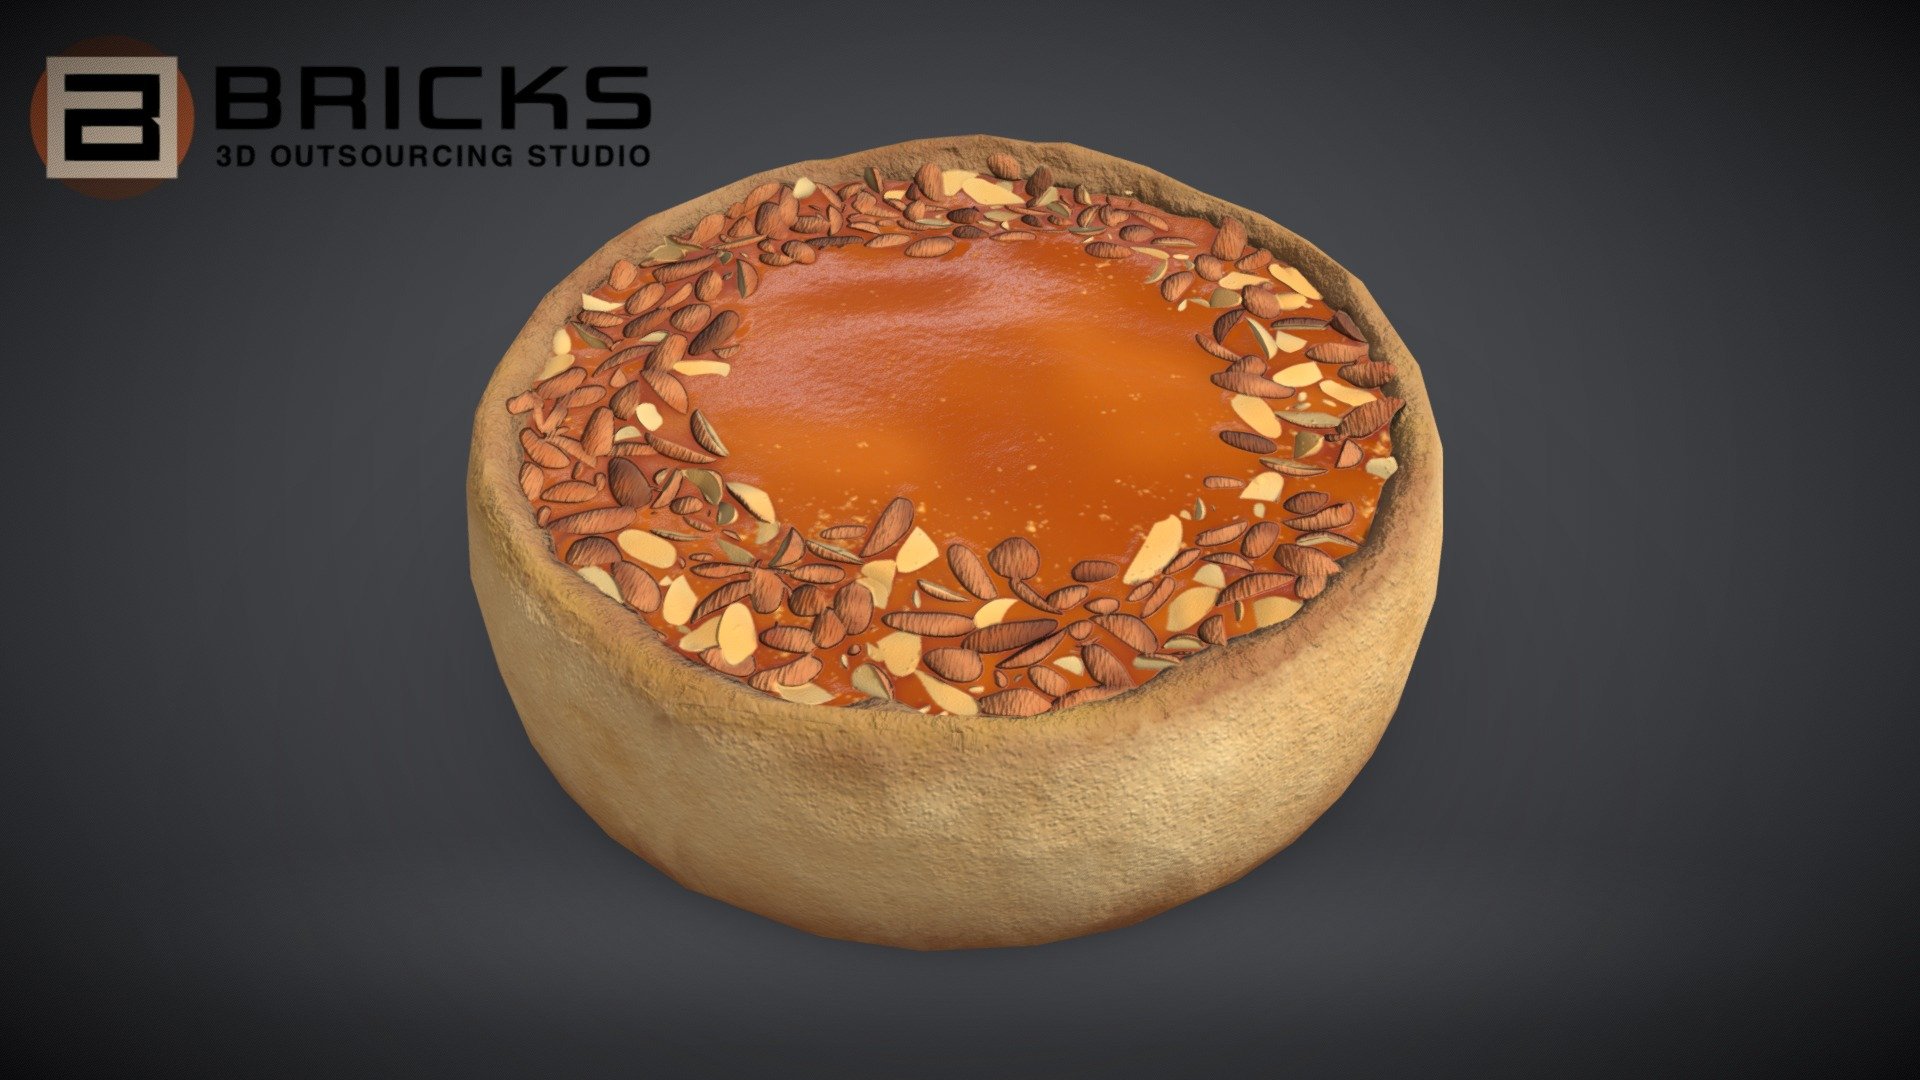 PBR Food Asset:
CheesecakeCaramel
Polycount: 1294
Vertex count: 649
Texture Size: 2048px x 2048px
Normal: OpenGL

If you need any adjust in file please contact us: team@bricks3dstudio.com

Hire us: tringuyen@bricks3dstudio.com
Here is us: https://www.bricks3dstudio.com/
        https://www.artstation.com/bricksstudio
        https://www.facebook.com/Bricks3dstudio/
        https://www.linkedin.com/in/bricks-studio-b10462252/ - CheesecakeCaramel - Buy Royalty Free 3D model by Bricks Studio (@bricks3dstudio) 3d model